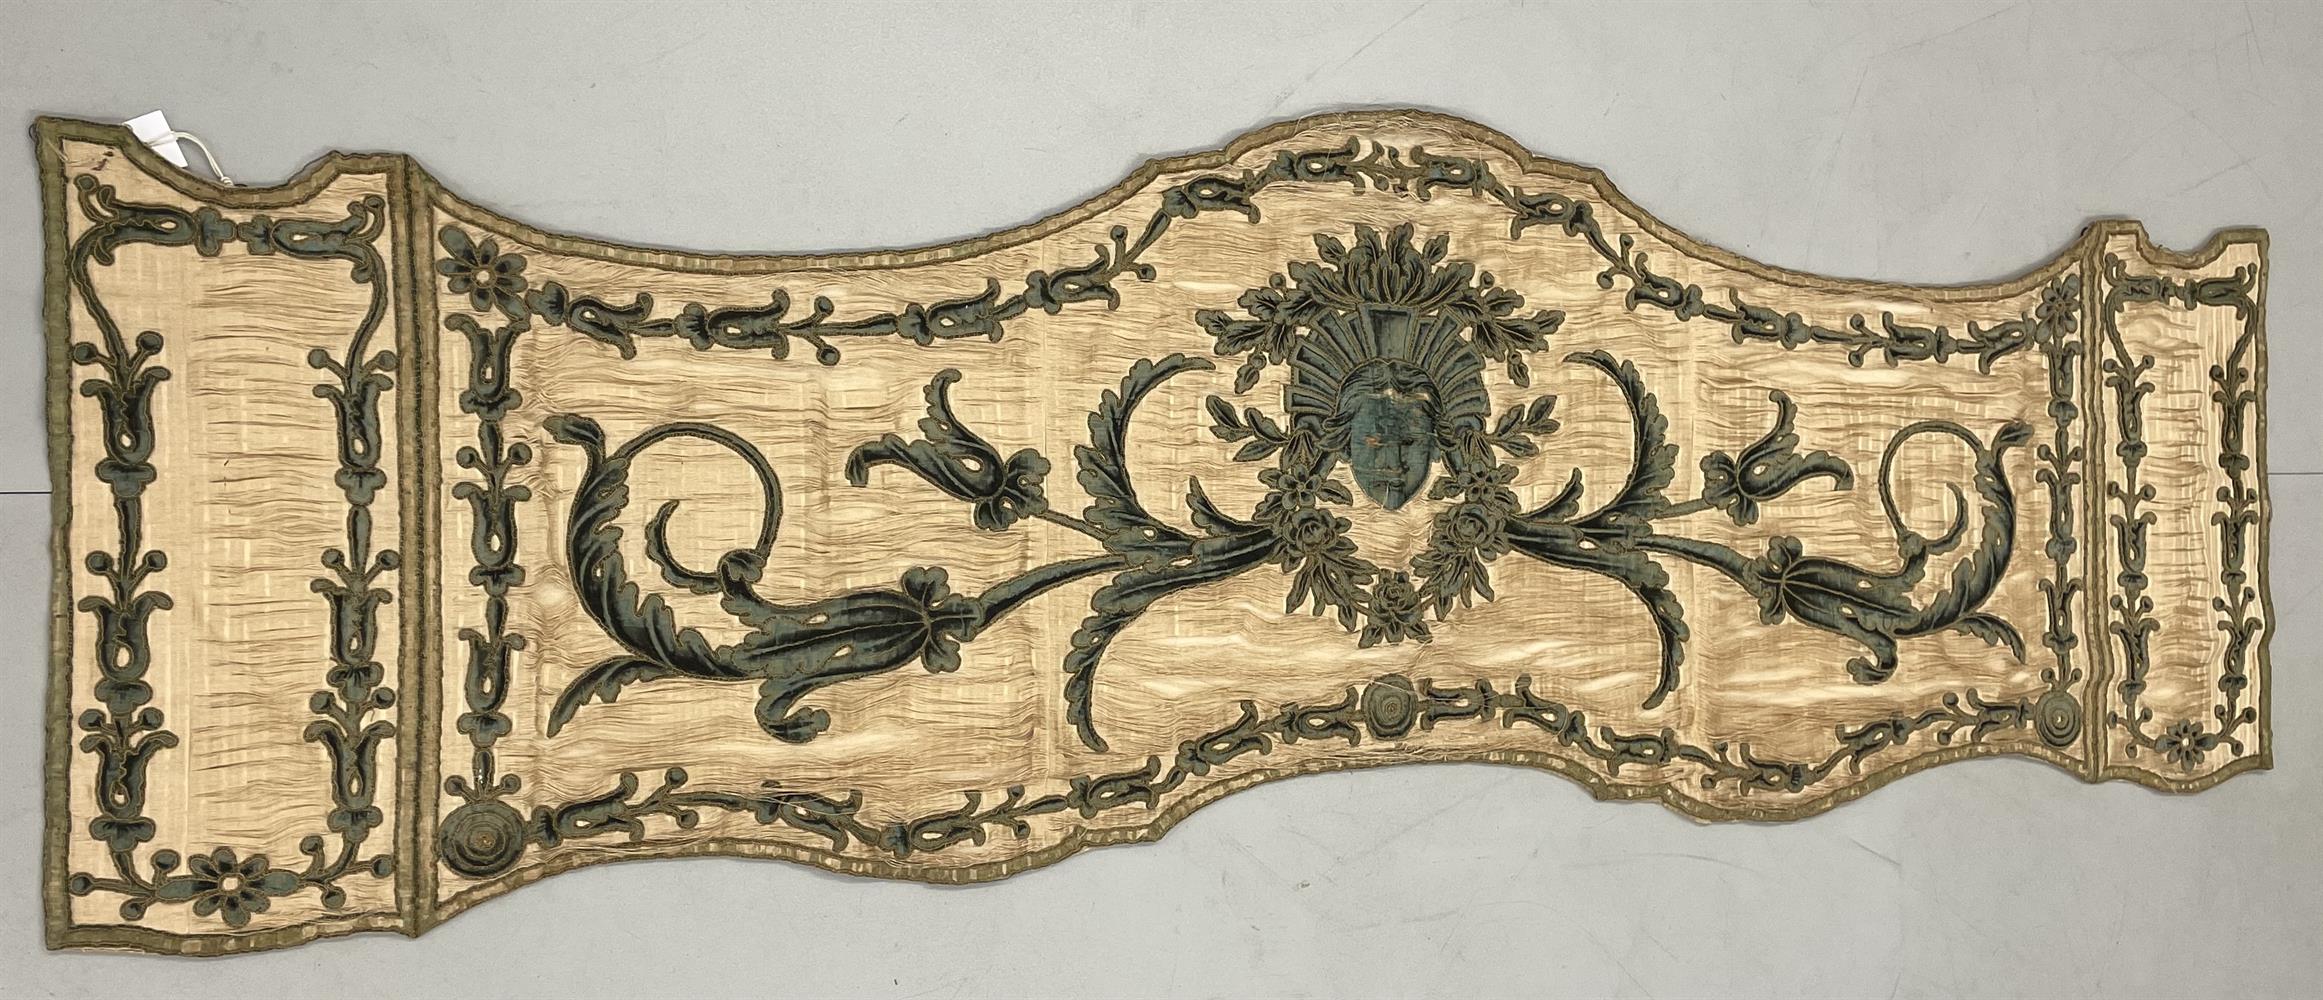 A SUITE OF ITALIAN OR FRENCH SILK BALDAQUIN BED PANELS, 18TH CENTURY AND LATER - Image 12 of 29